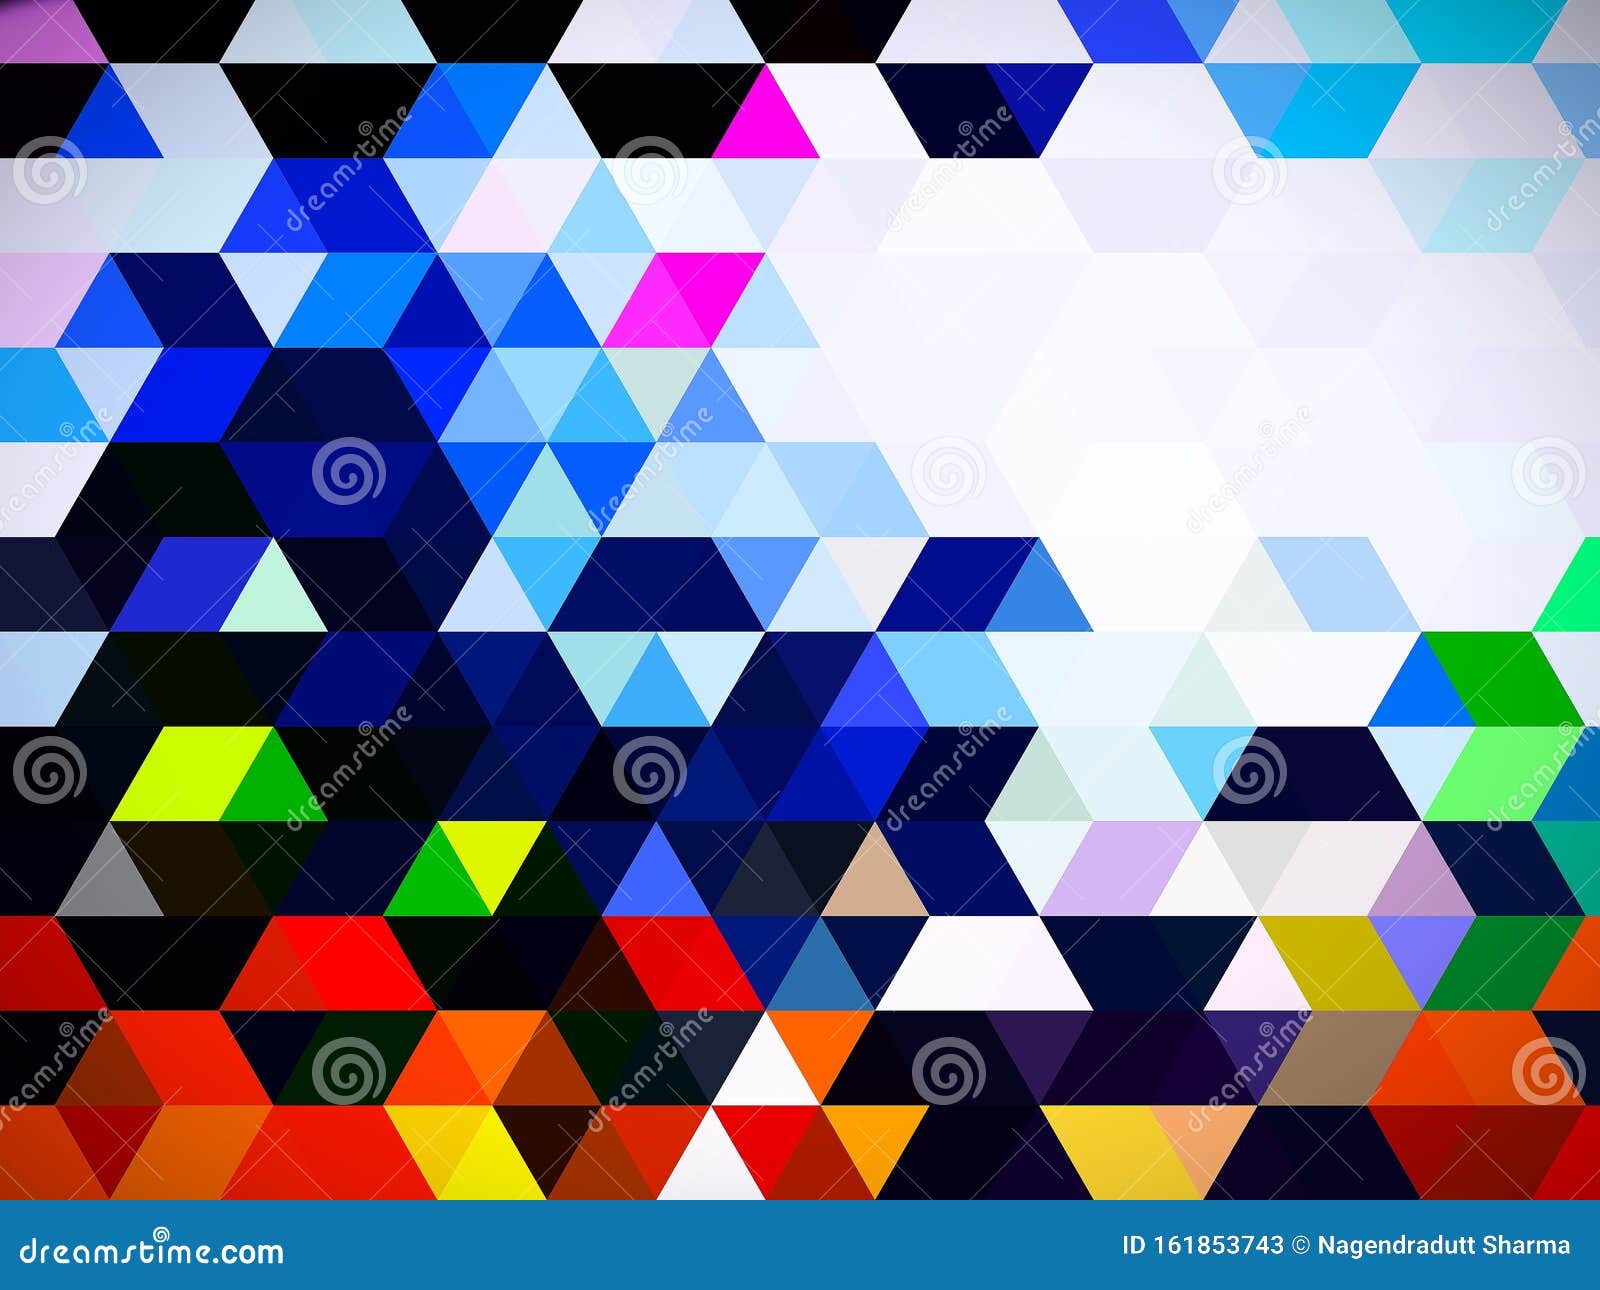 a distinguishing  of colorful digital pattern of squares